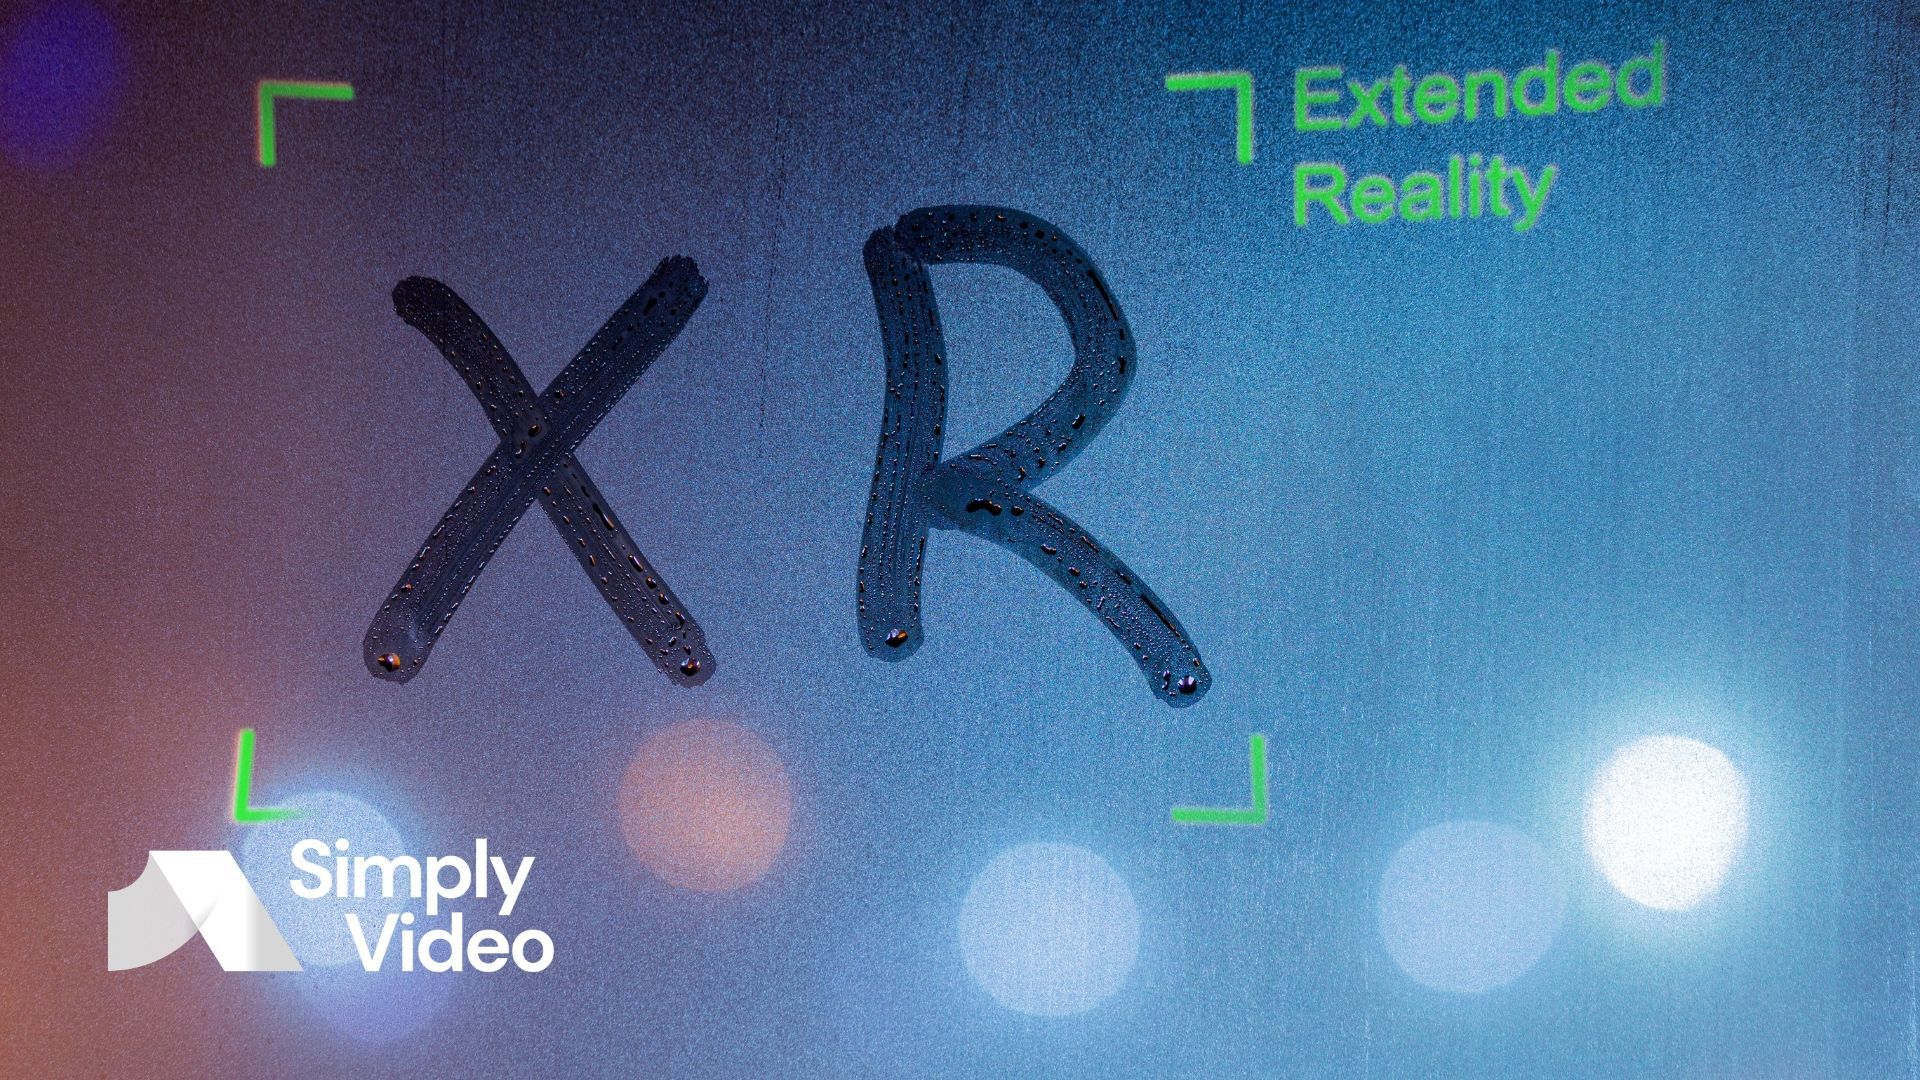 How can you successfully implement an XR solution, overcome the novelty factor and make it work for your bottom line? Discover 5 steps you can take.